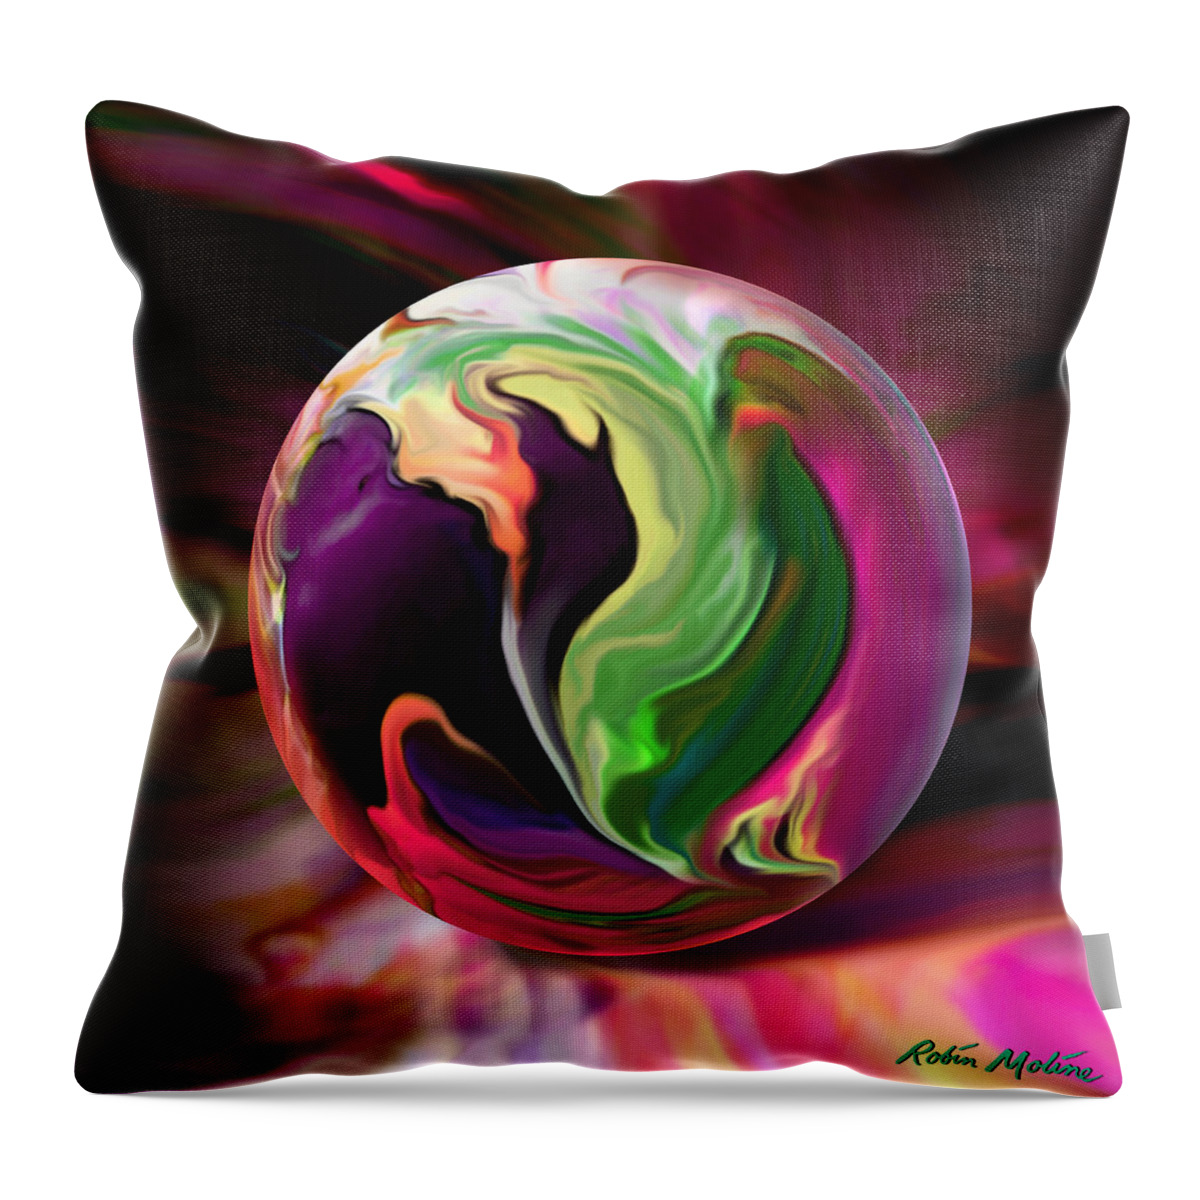 Jack-in-the-pulpit Throw Pillow featuring the digital art Jack in the Pulpit Globe by Robin Moline